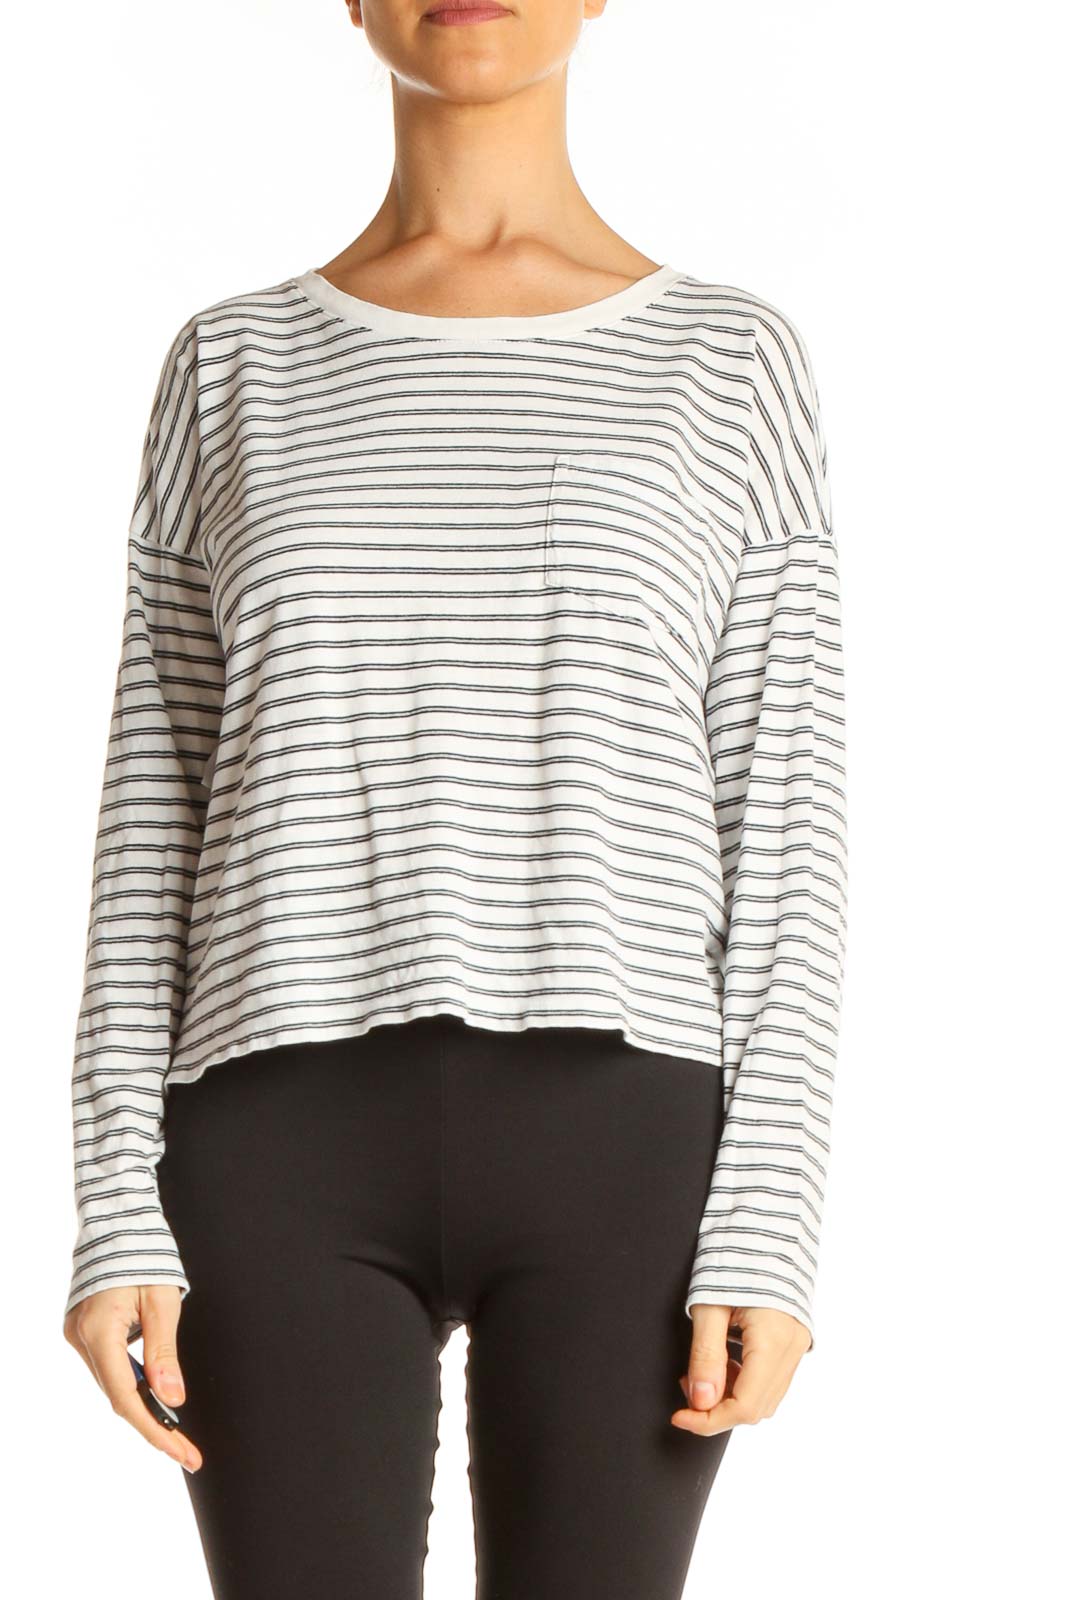 White Striped Casual Top Front